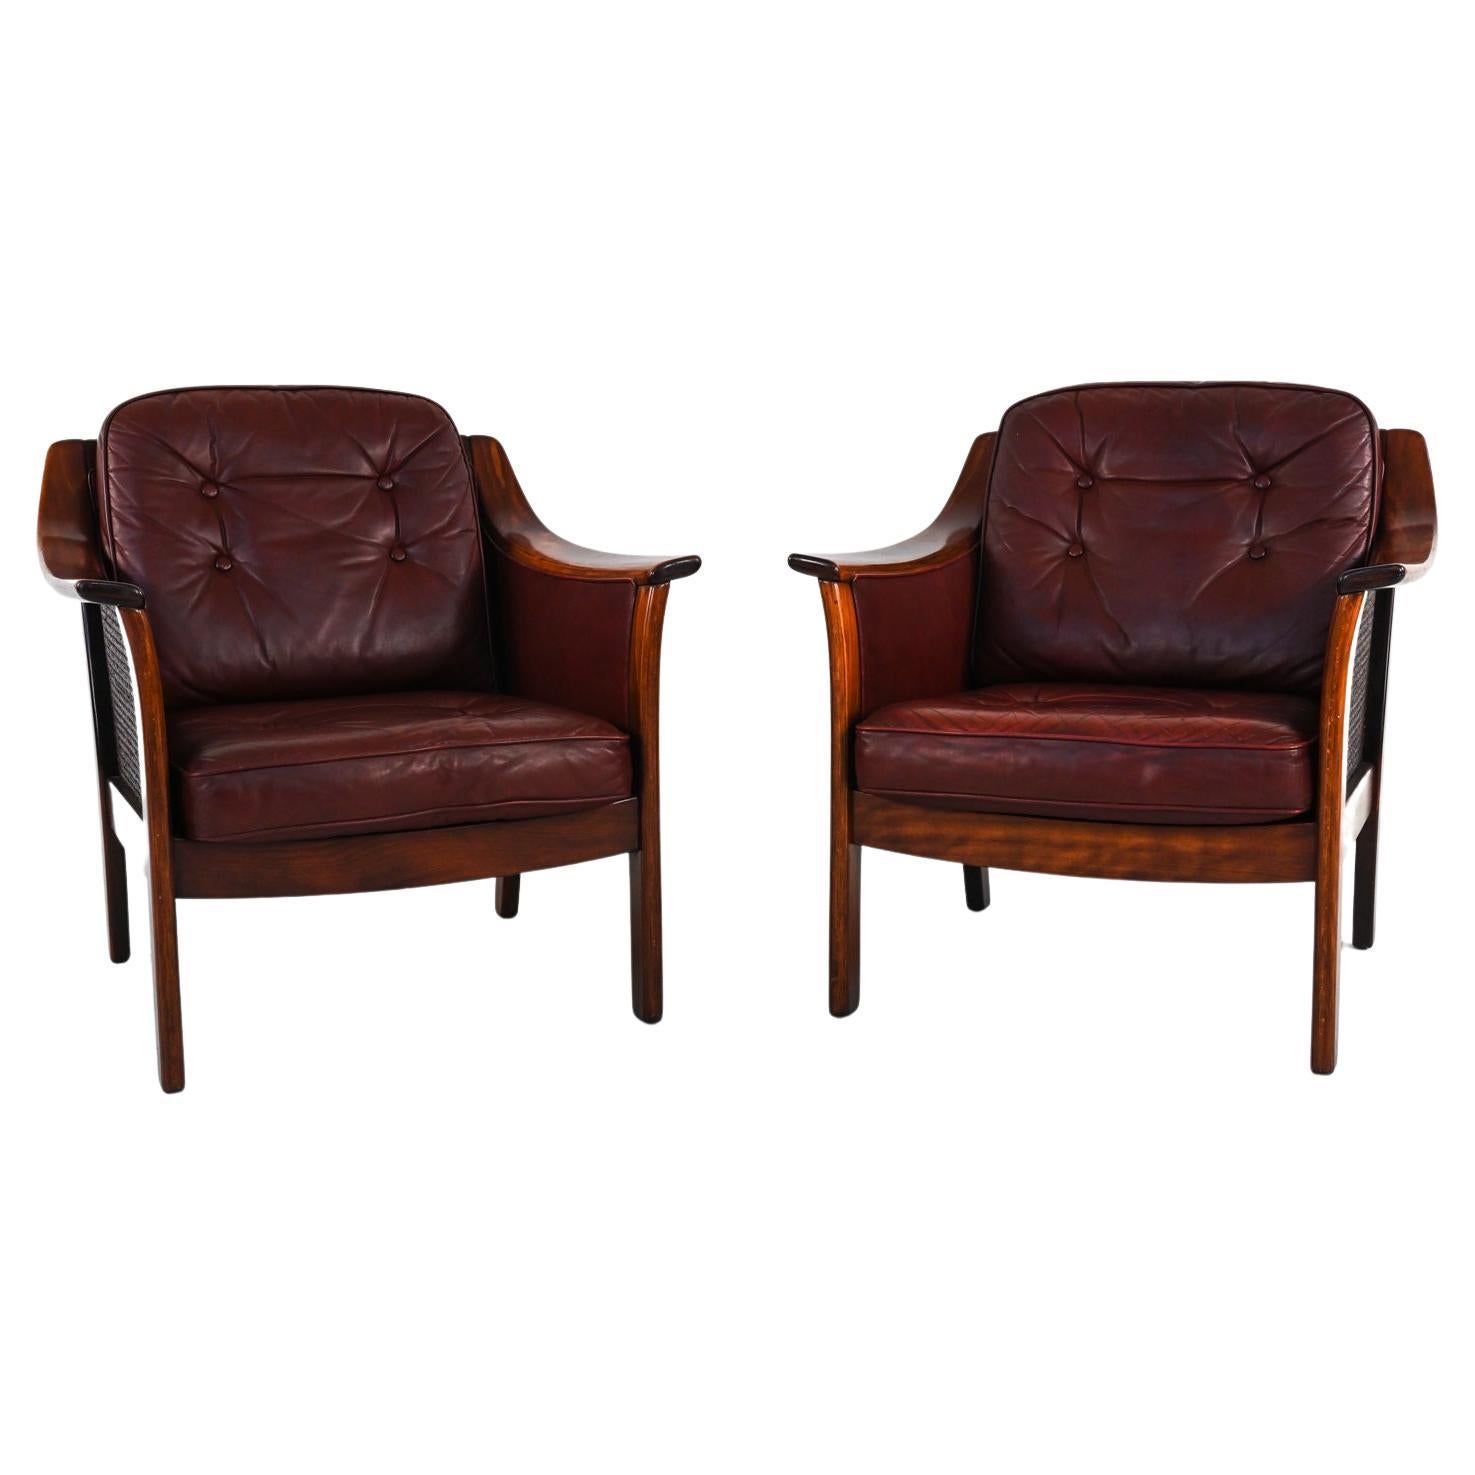 Pair of Torbjorn Afdal for Bruksbo Leather & Caned Lounge Chairs